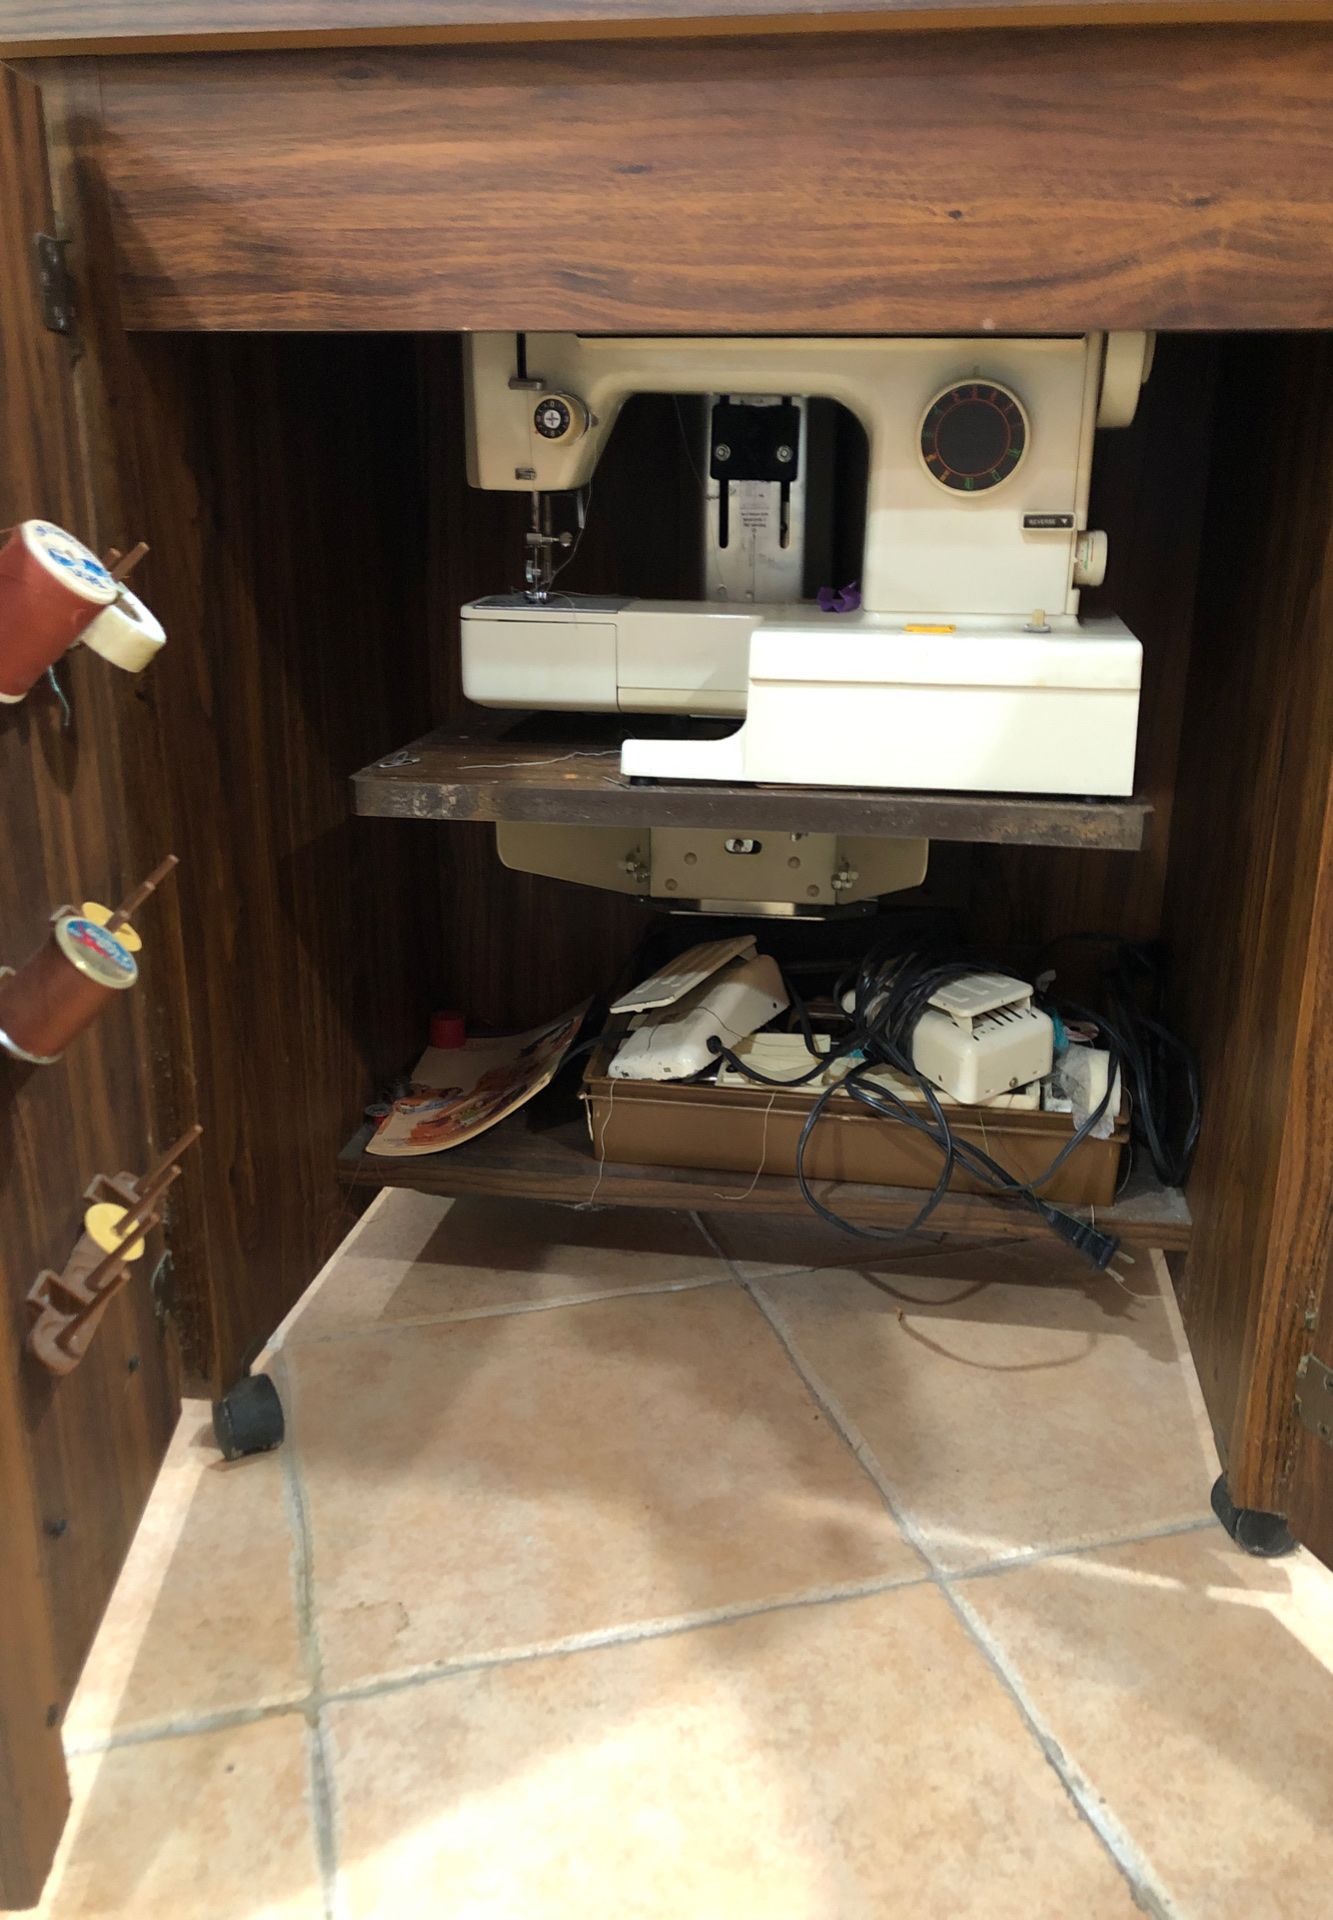 Kenmore sewing machine in a wood furniture piece